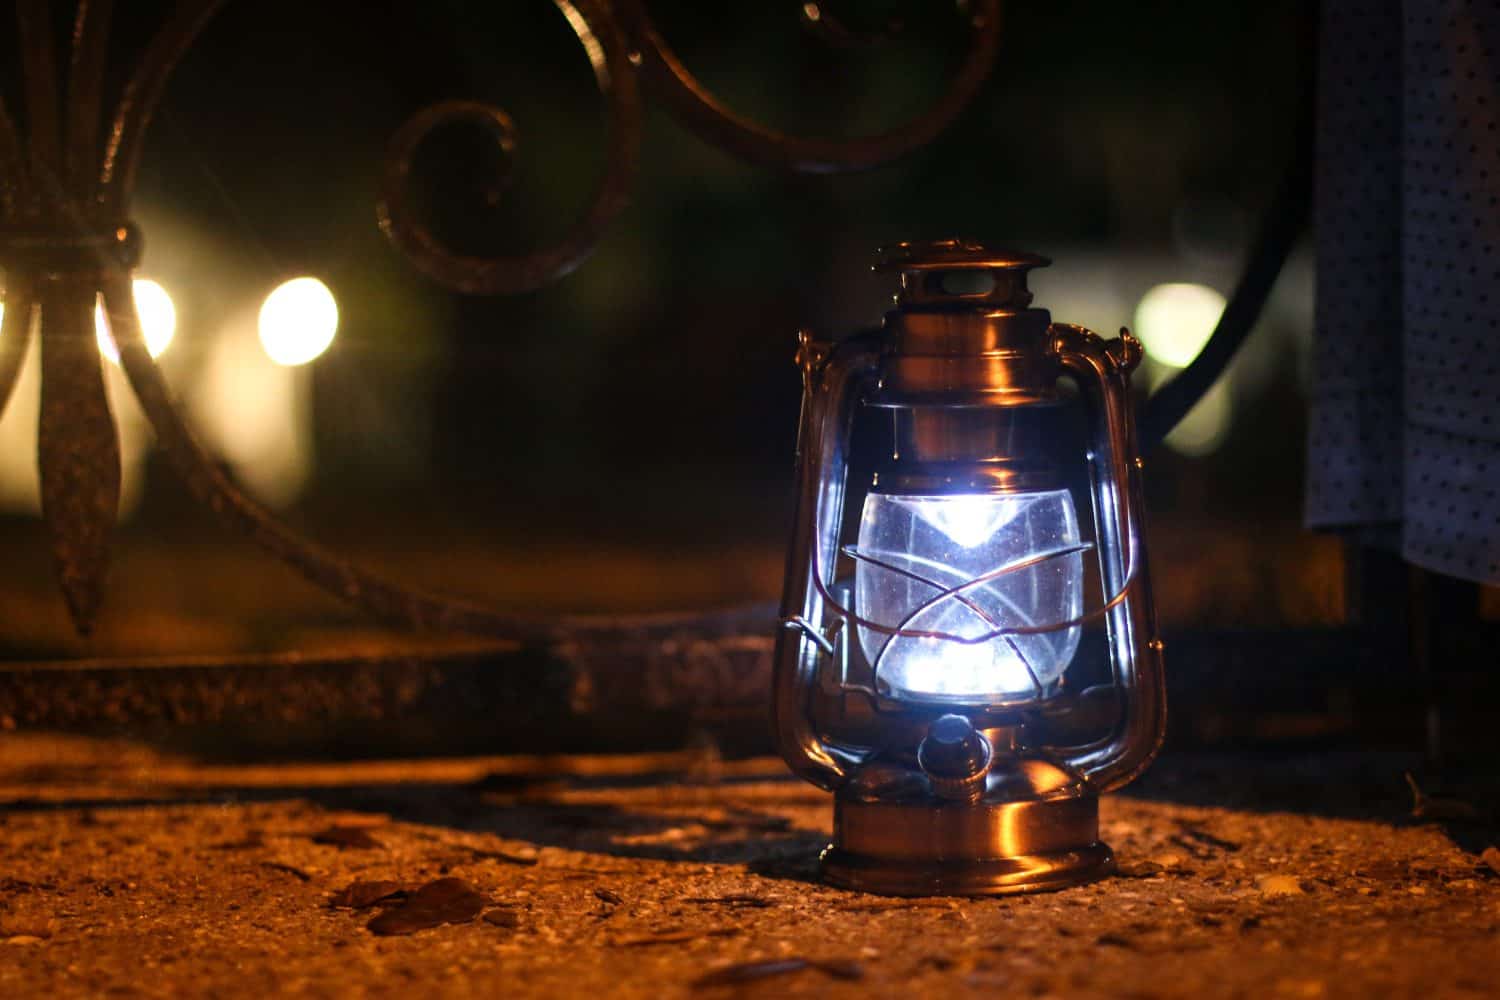 A lantern illuminates the way during a ghost tour in St. Augustine, Florida.